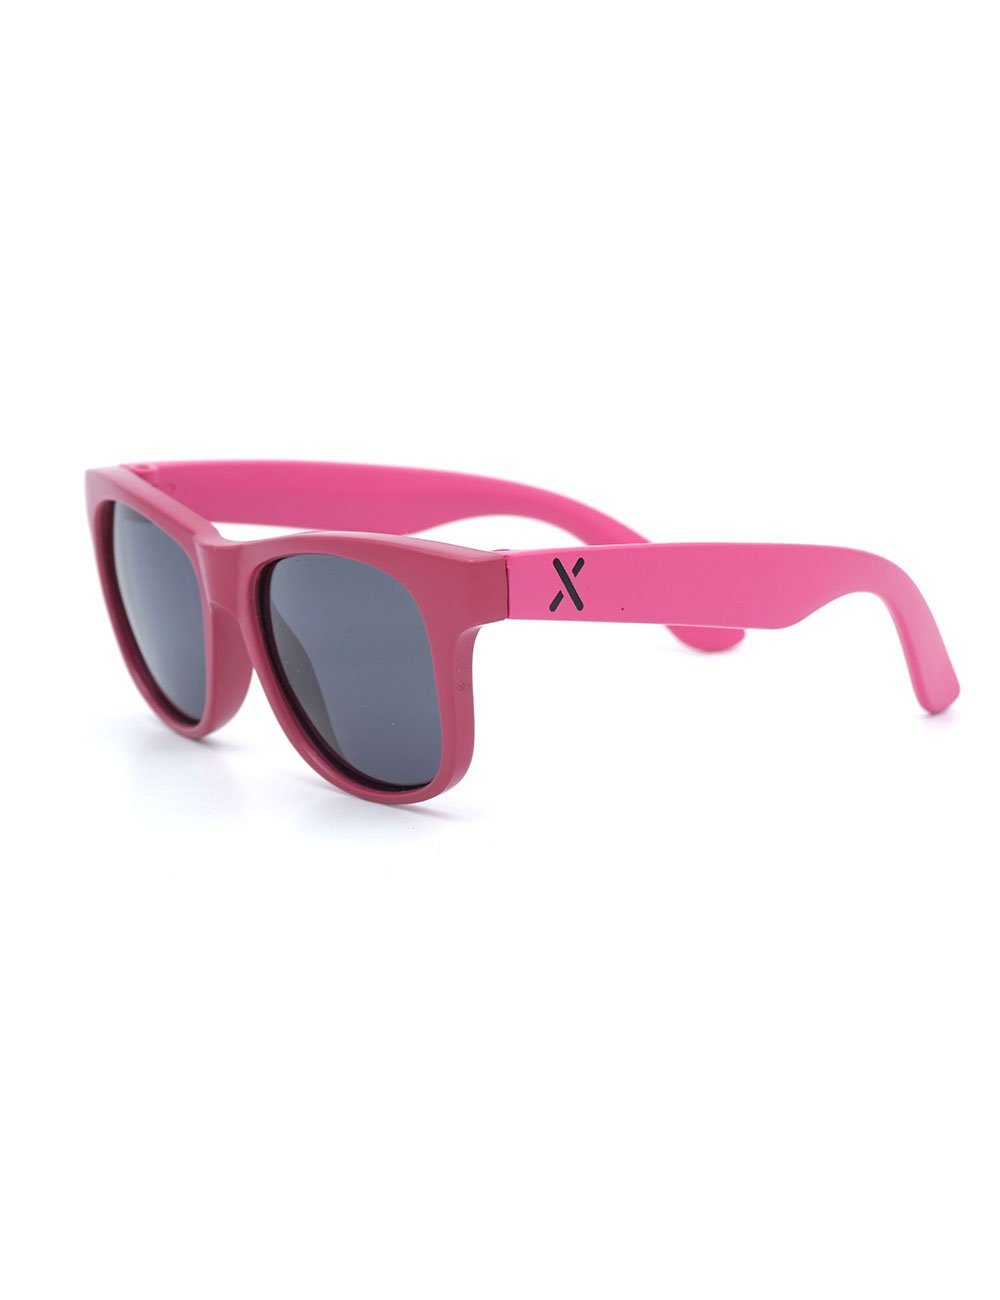 inkl.Box,Microfaserb Sonnenbrille MAXIMO KIDS-Sonnenbrille 'classic', berry/pink